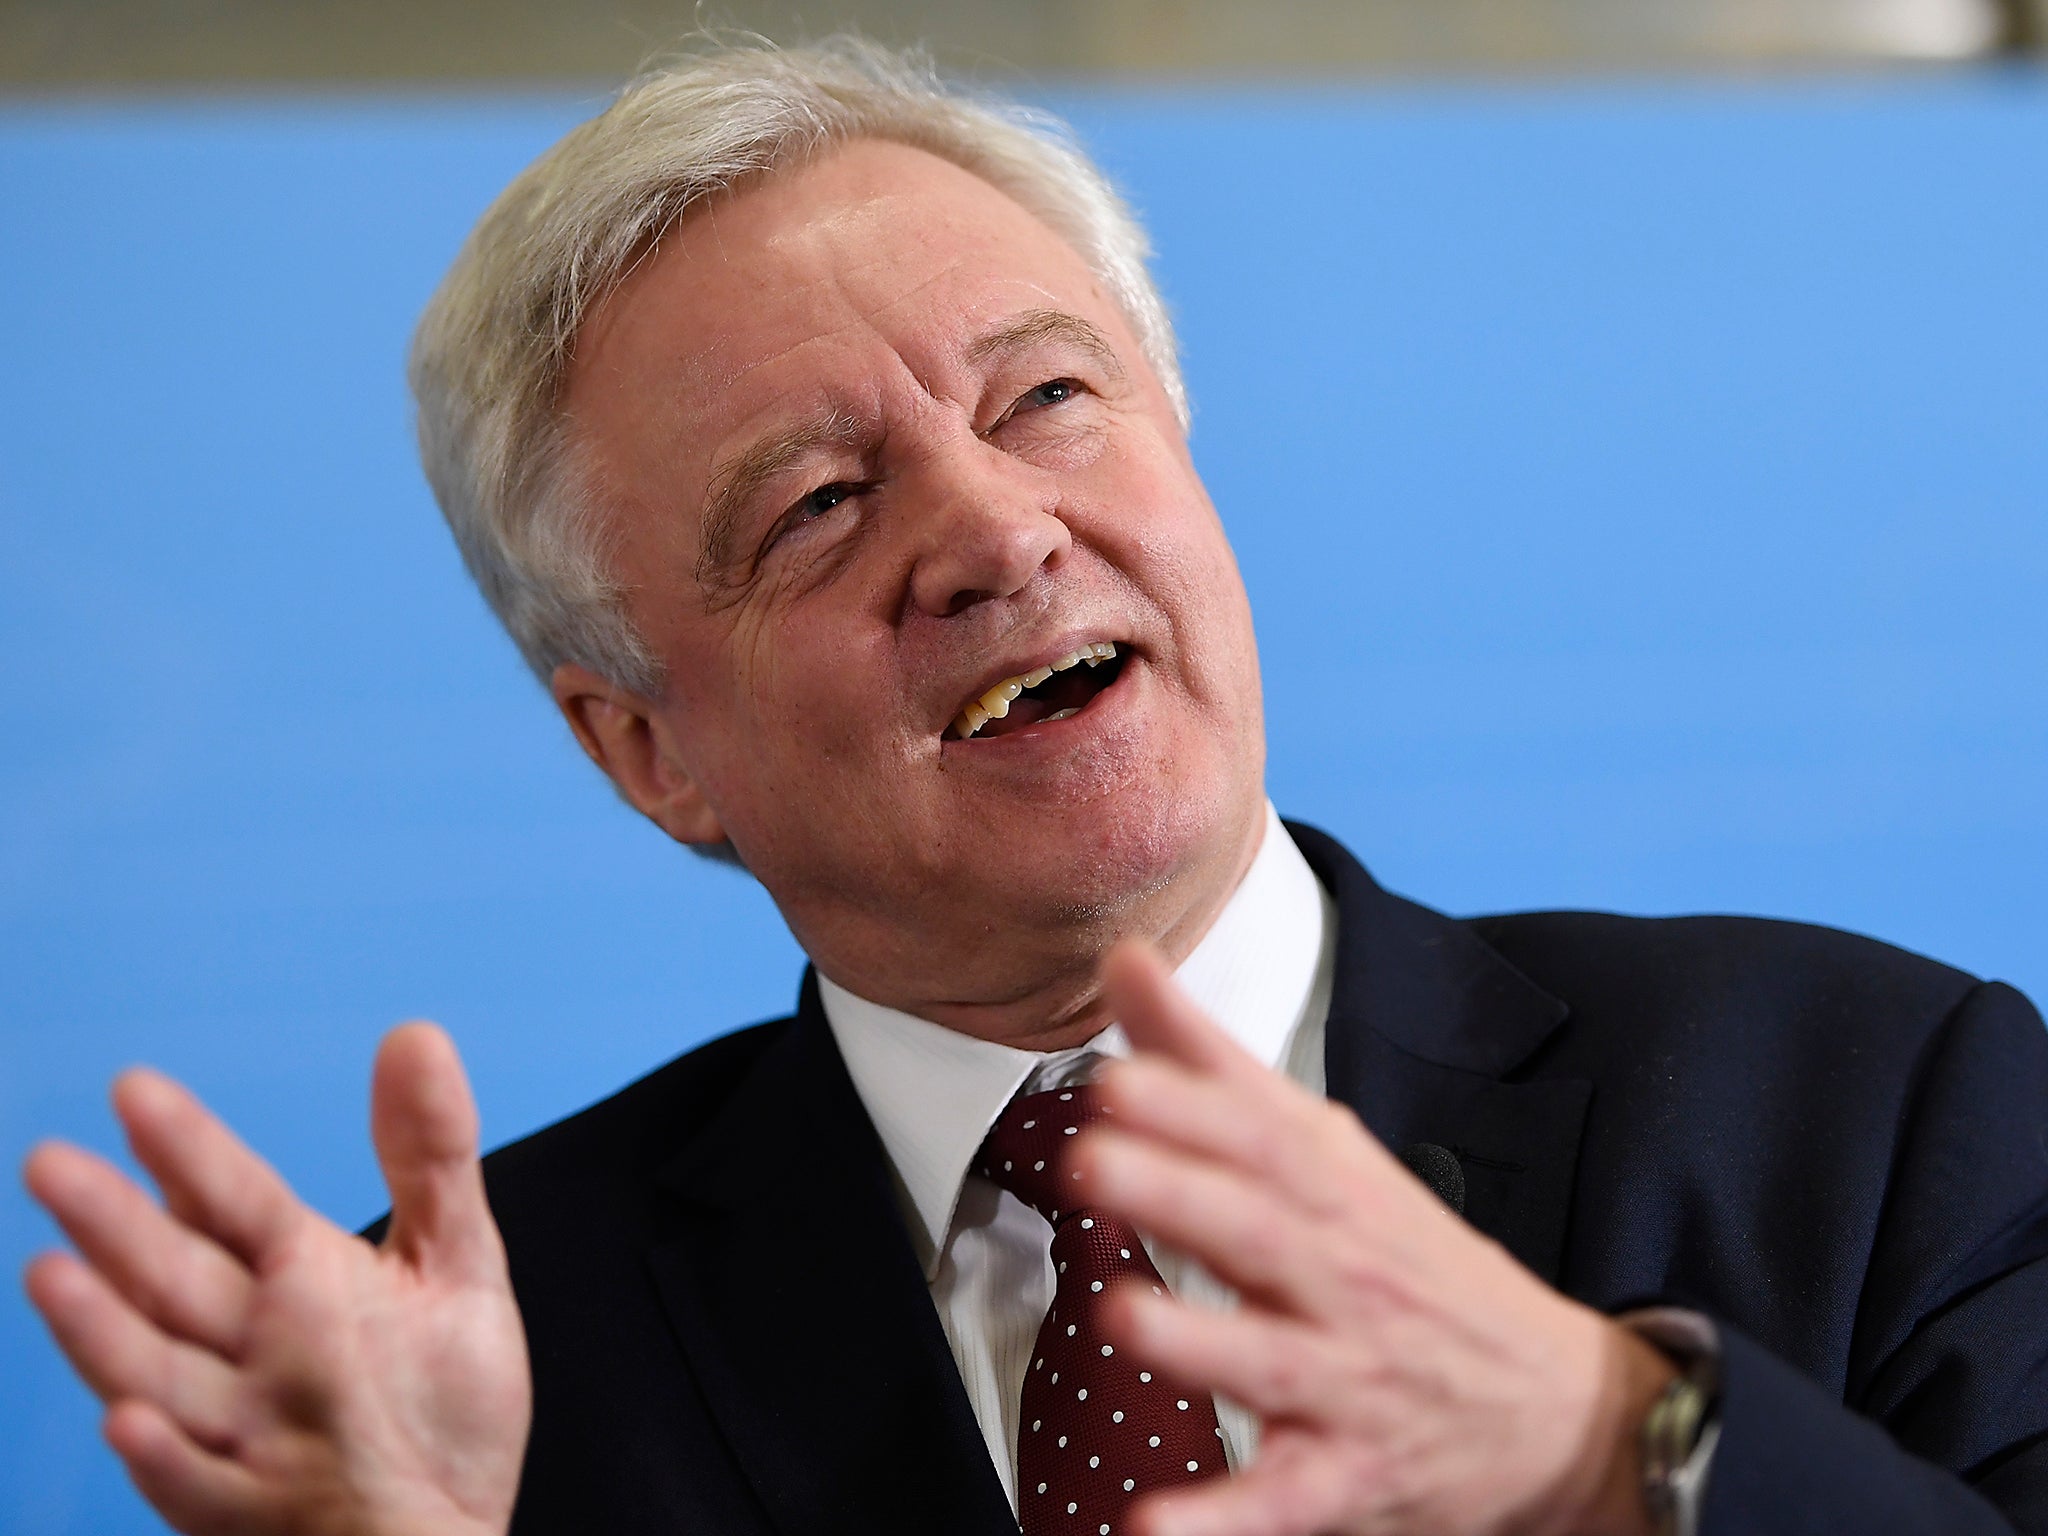 David Davis will order peers to ditch the Lords amendments